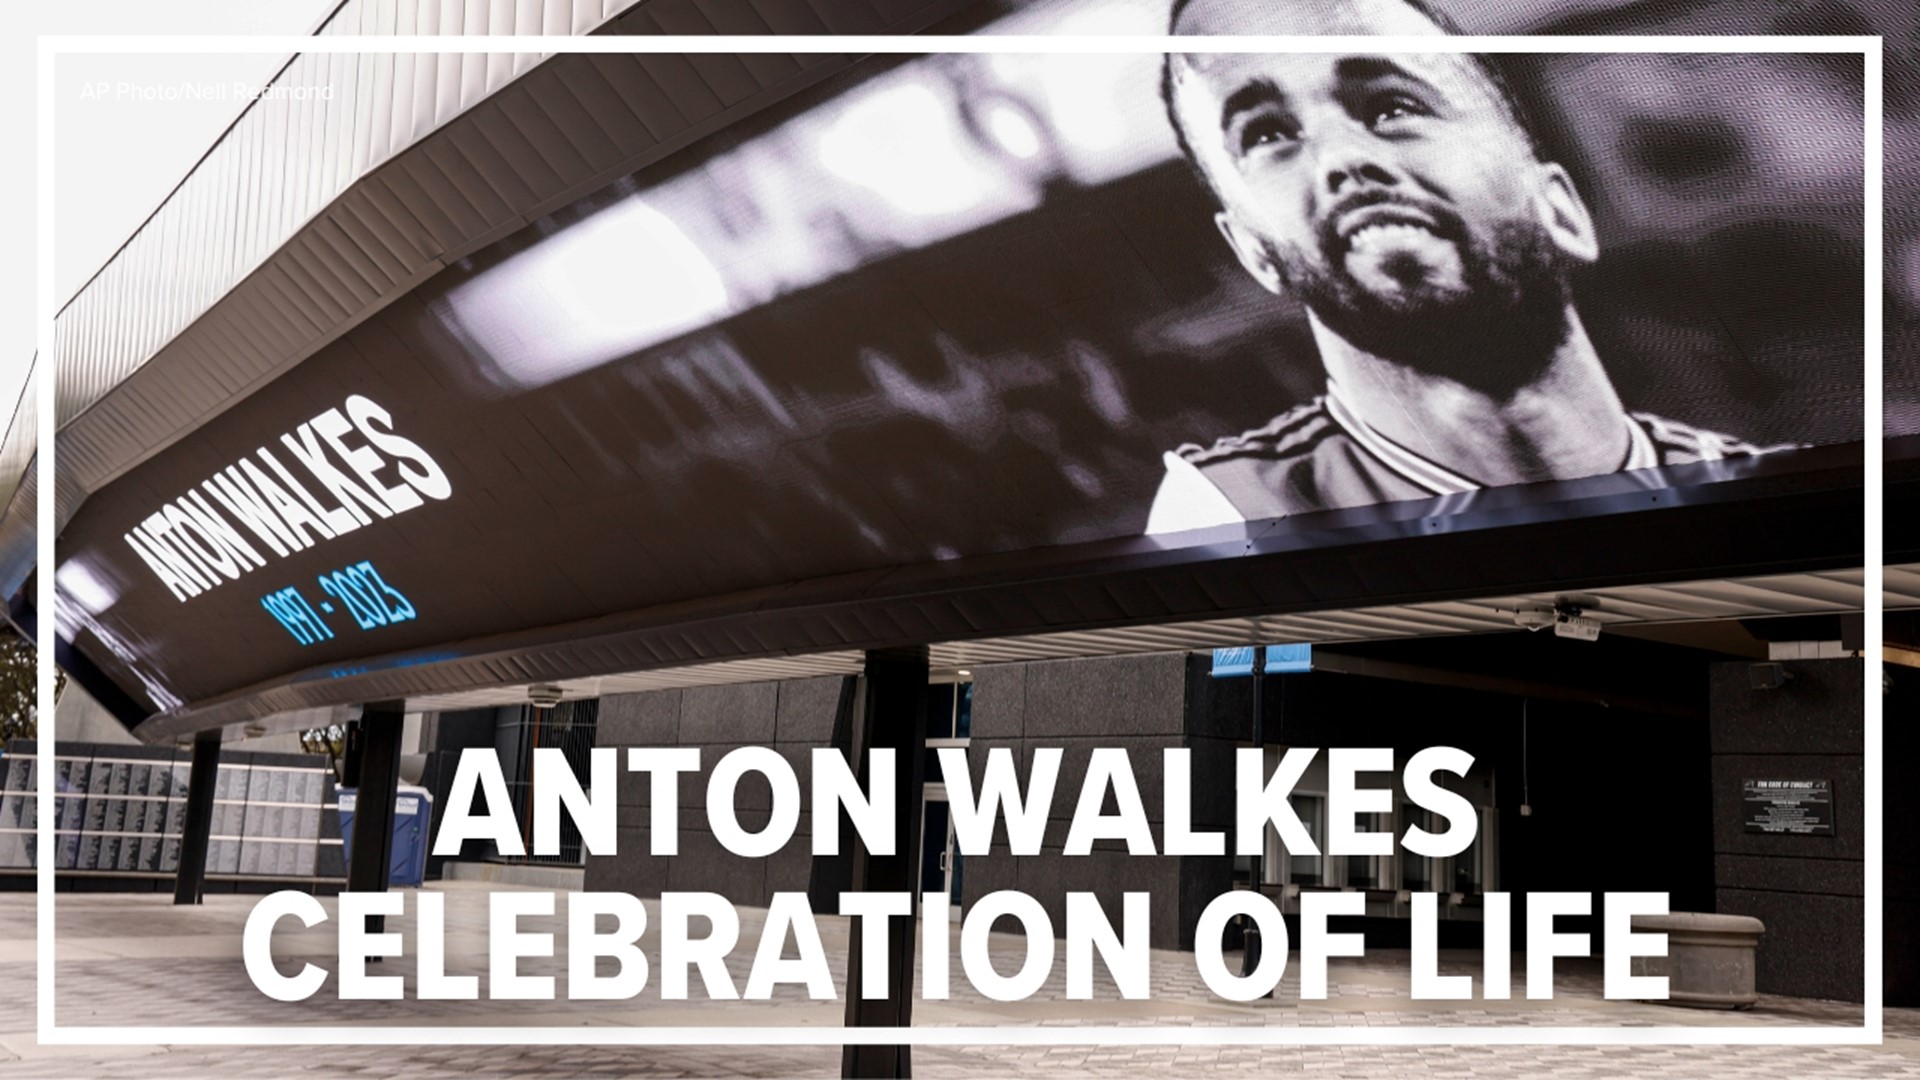 Charlotte FC team members, fans, and loved ones honor Anton Walkes' life.